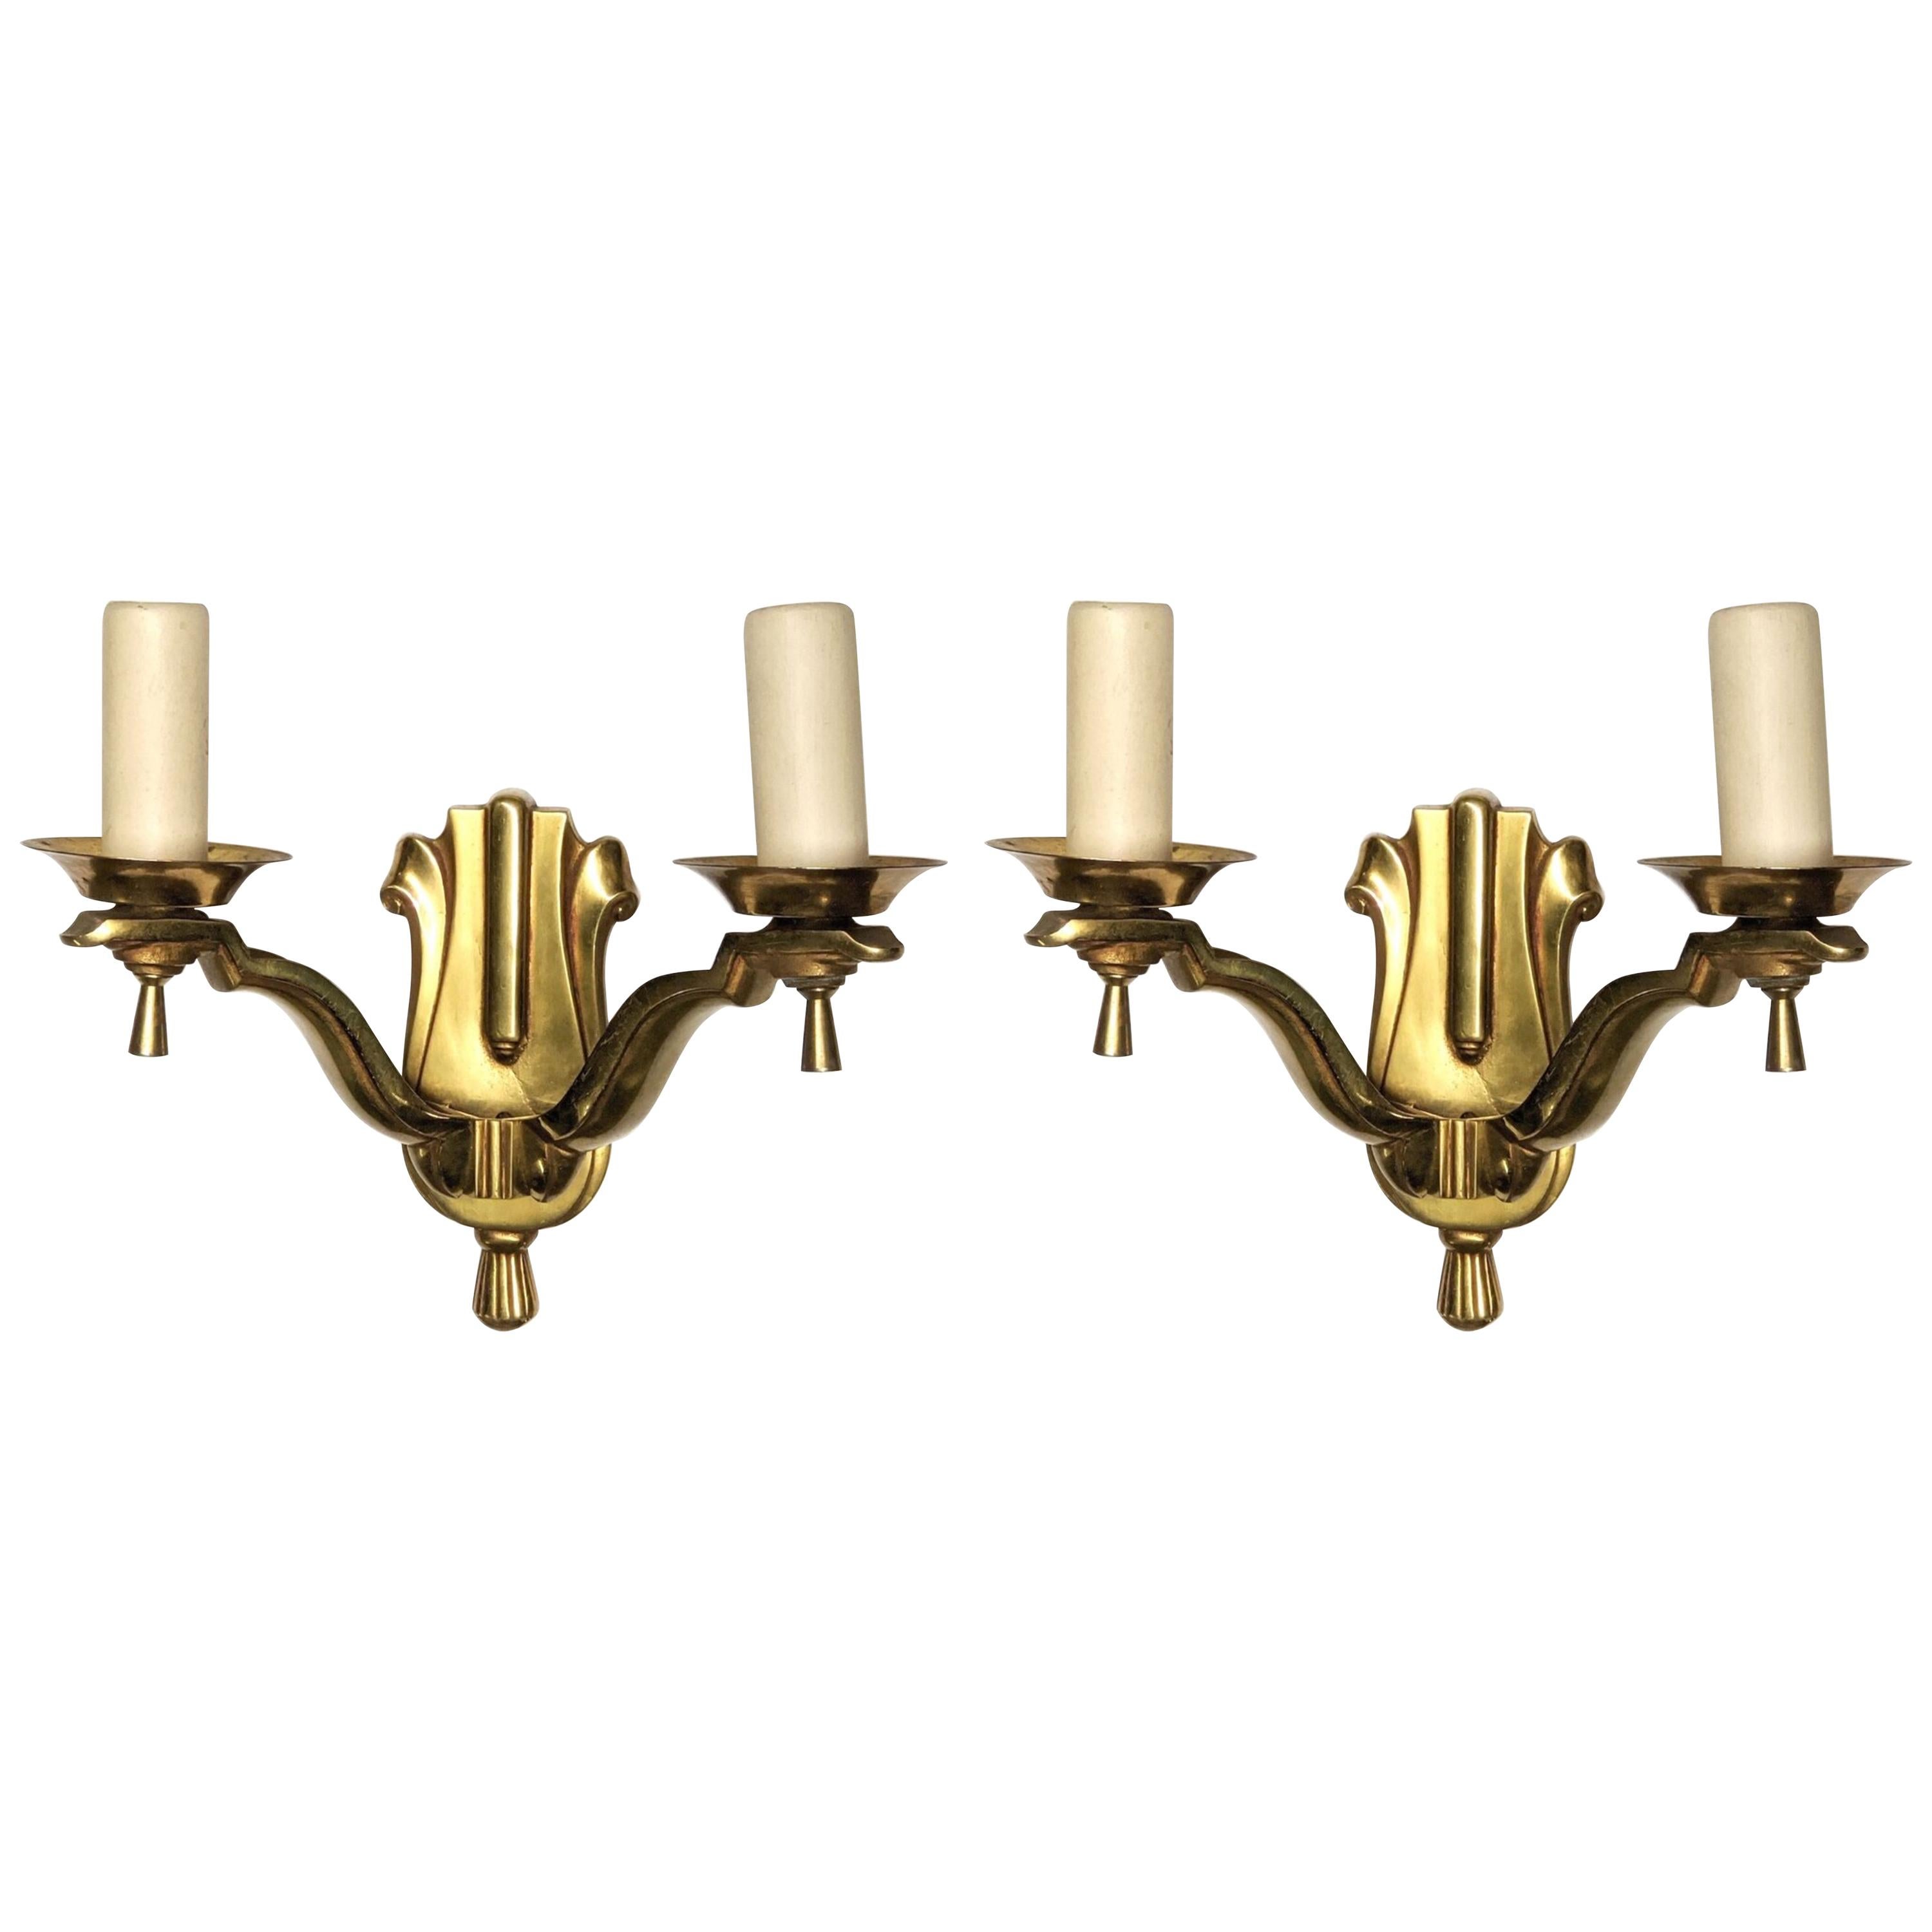 Pair of Two-Branch Bronze Sconces